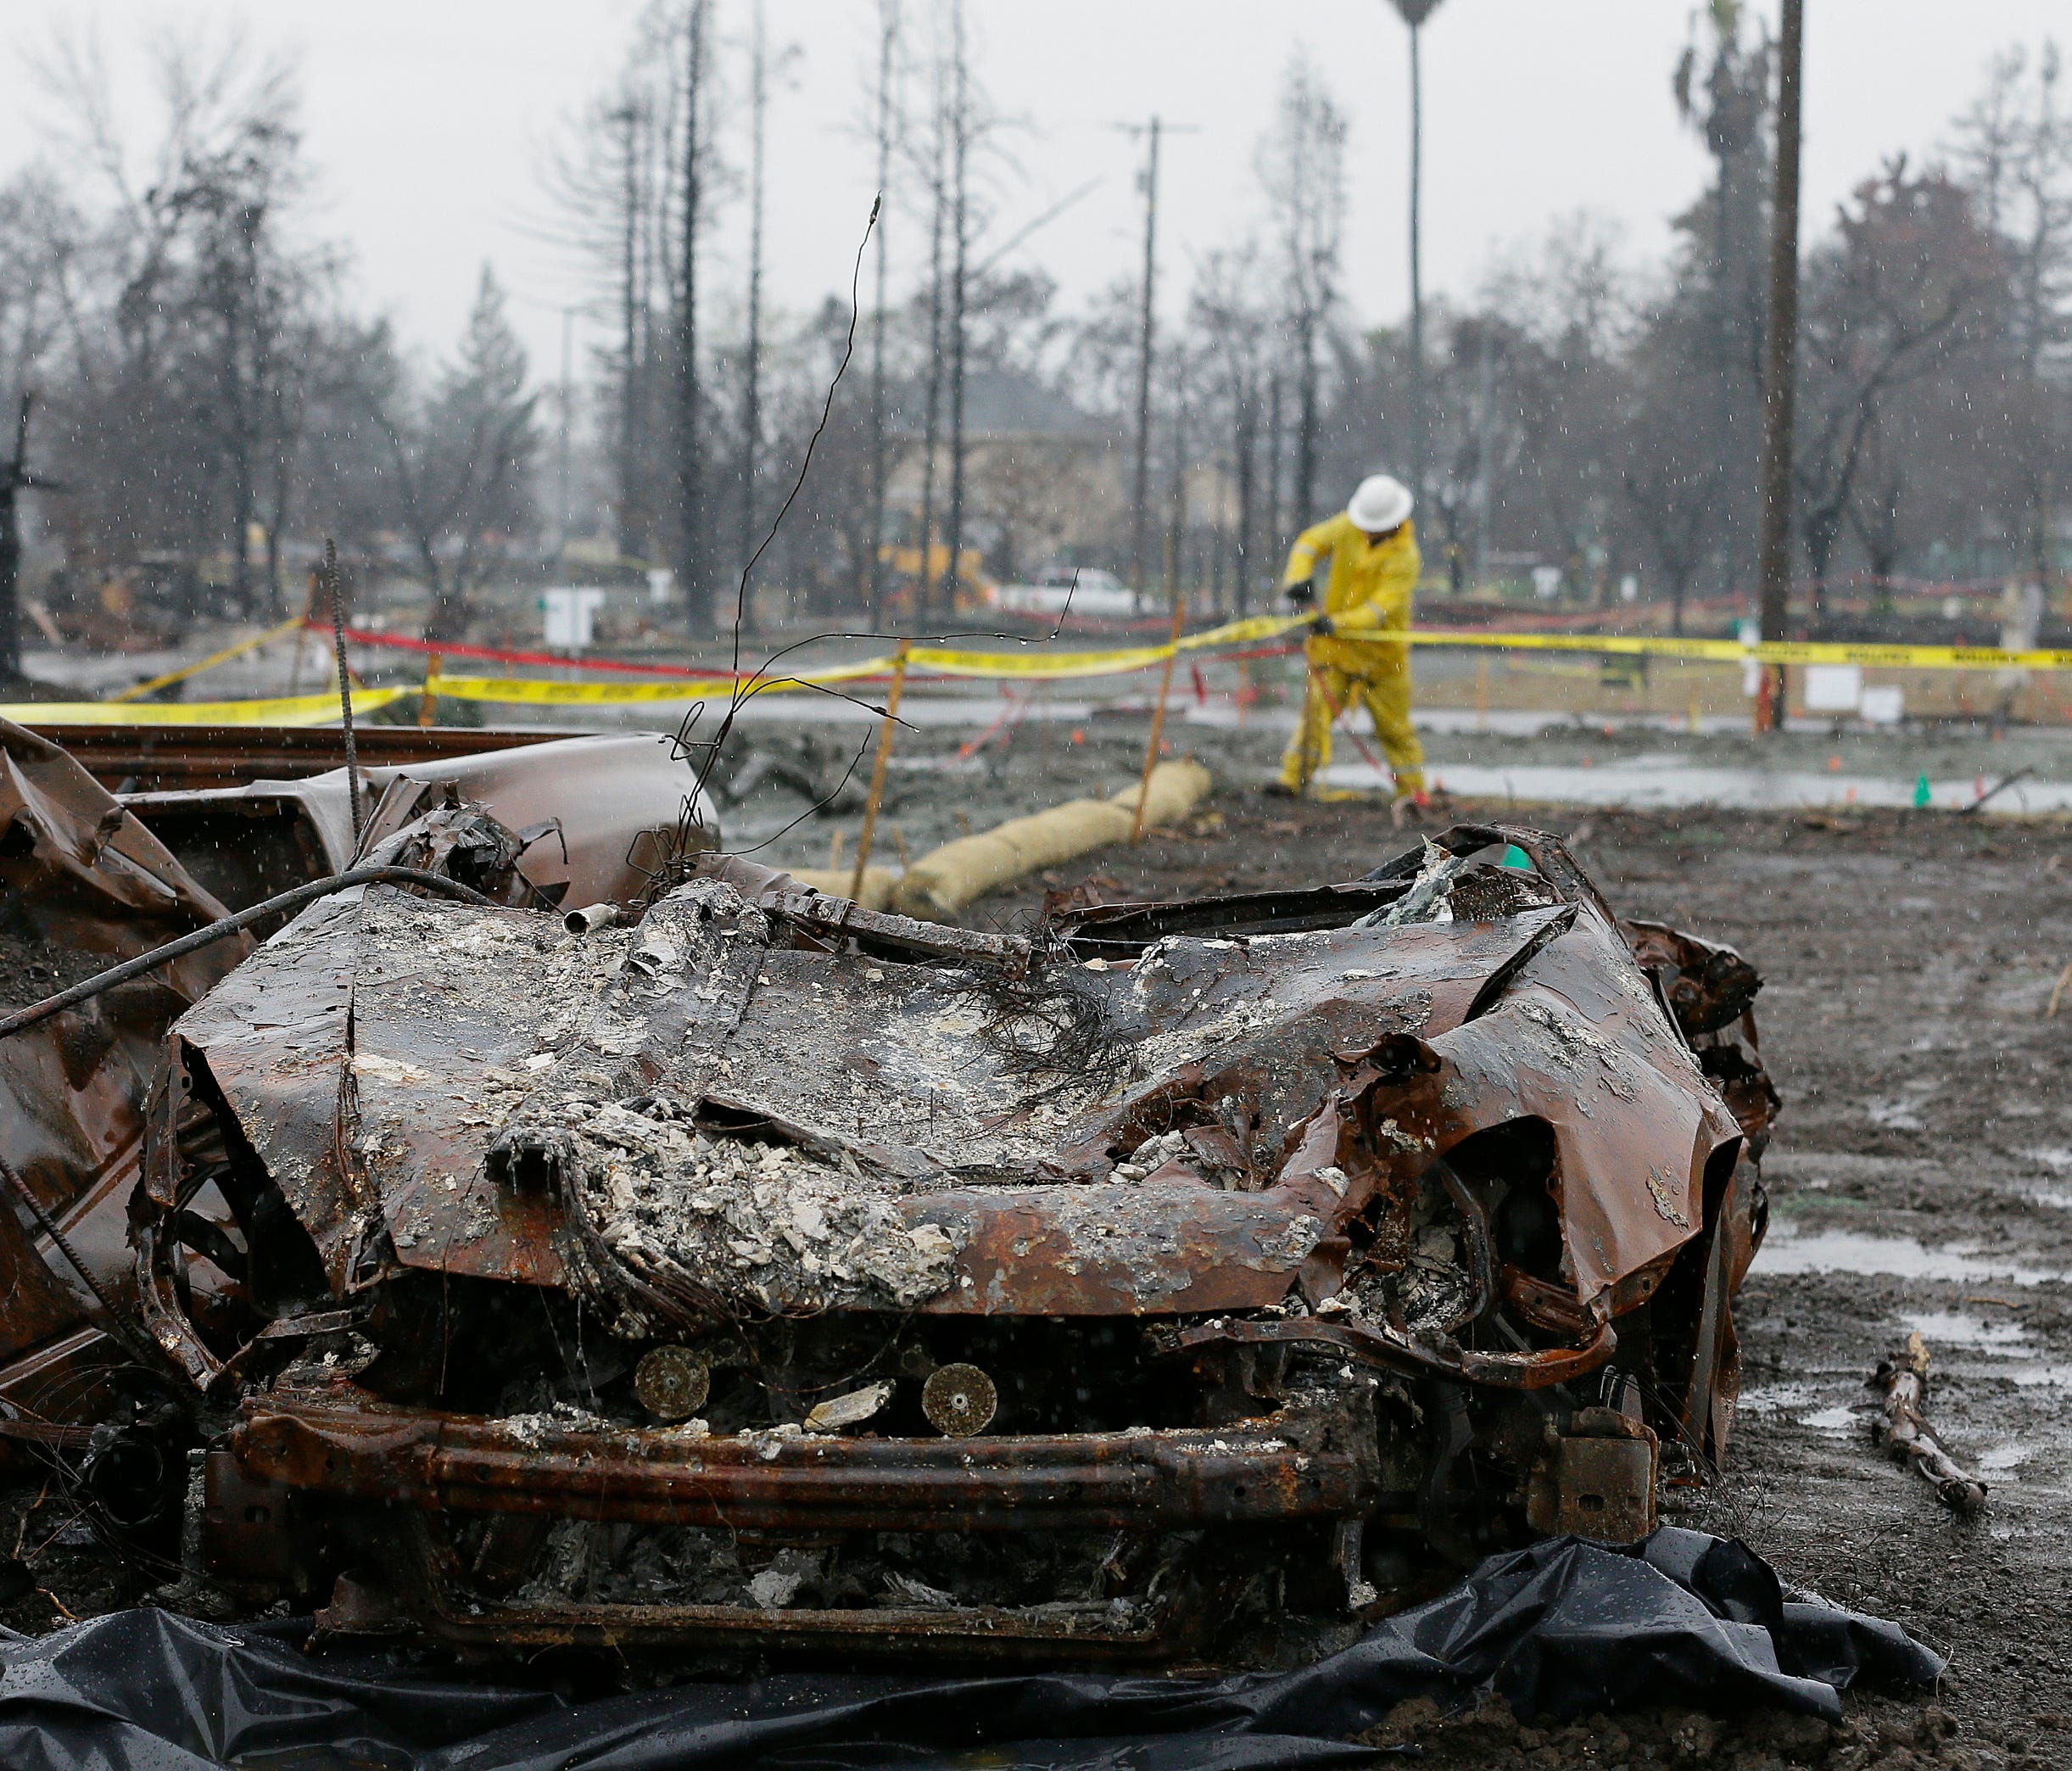 With a burned car in the foreground a worker finishes up erosion control efforts in the wildfire damaged Coffey Park neighborhood, Monday, Jan. 8, 2018, in Santa Rosa, Calif.